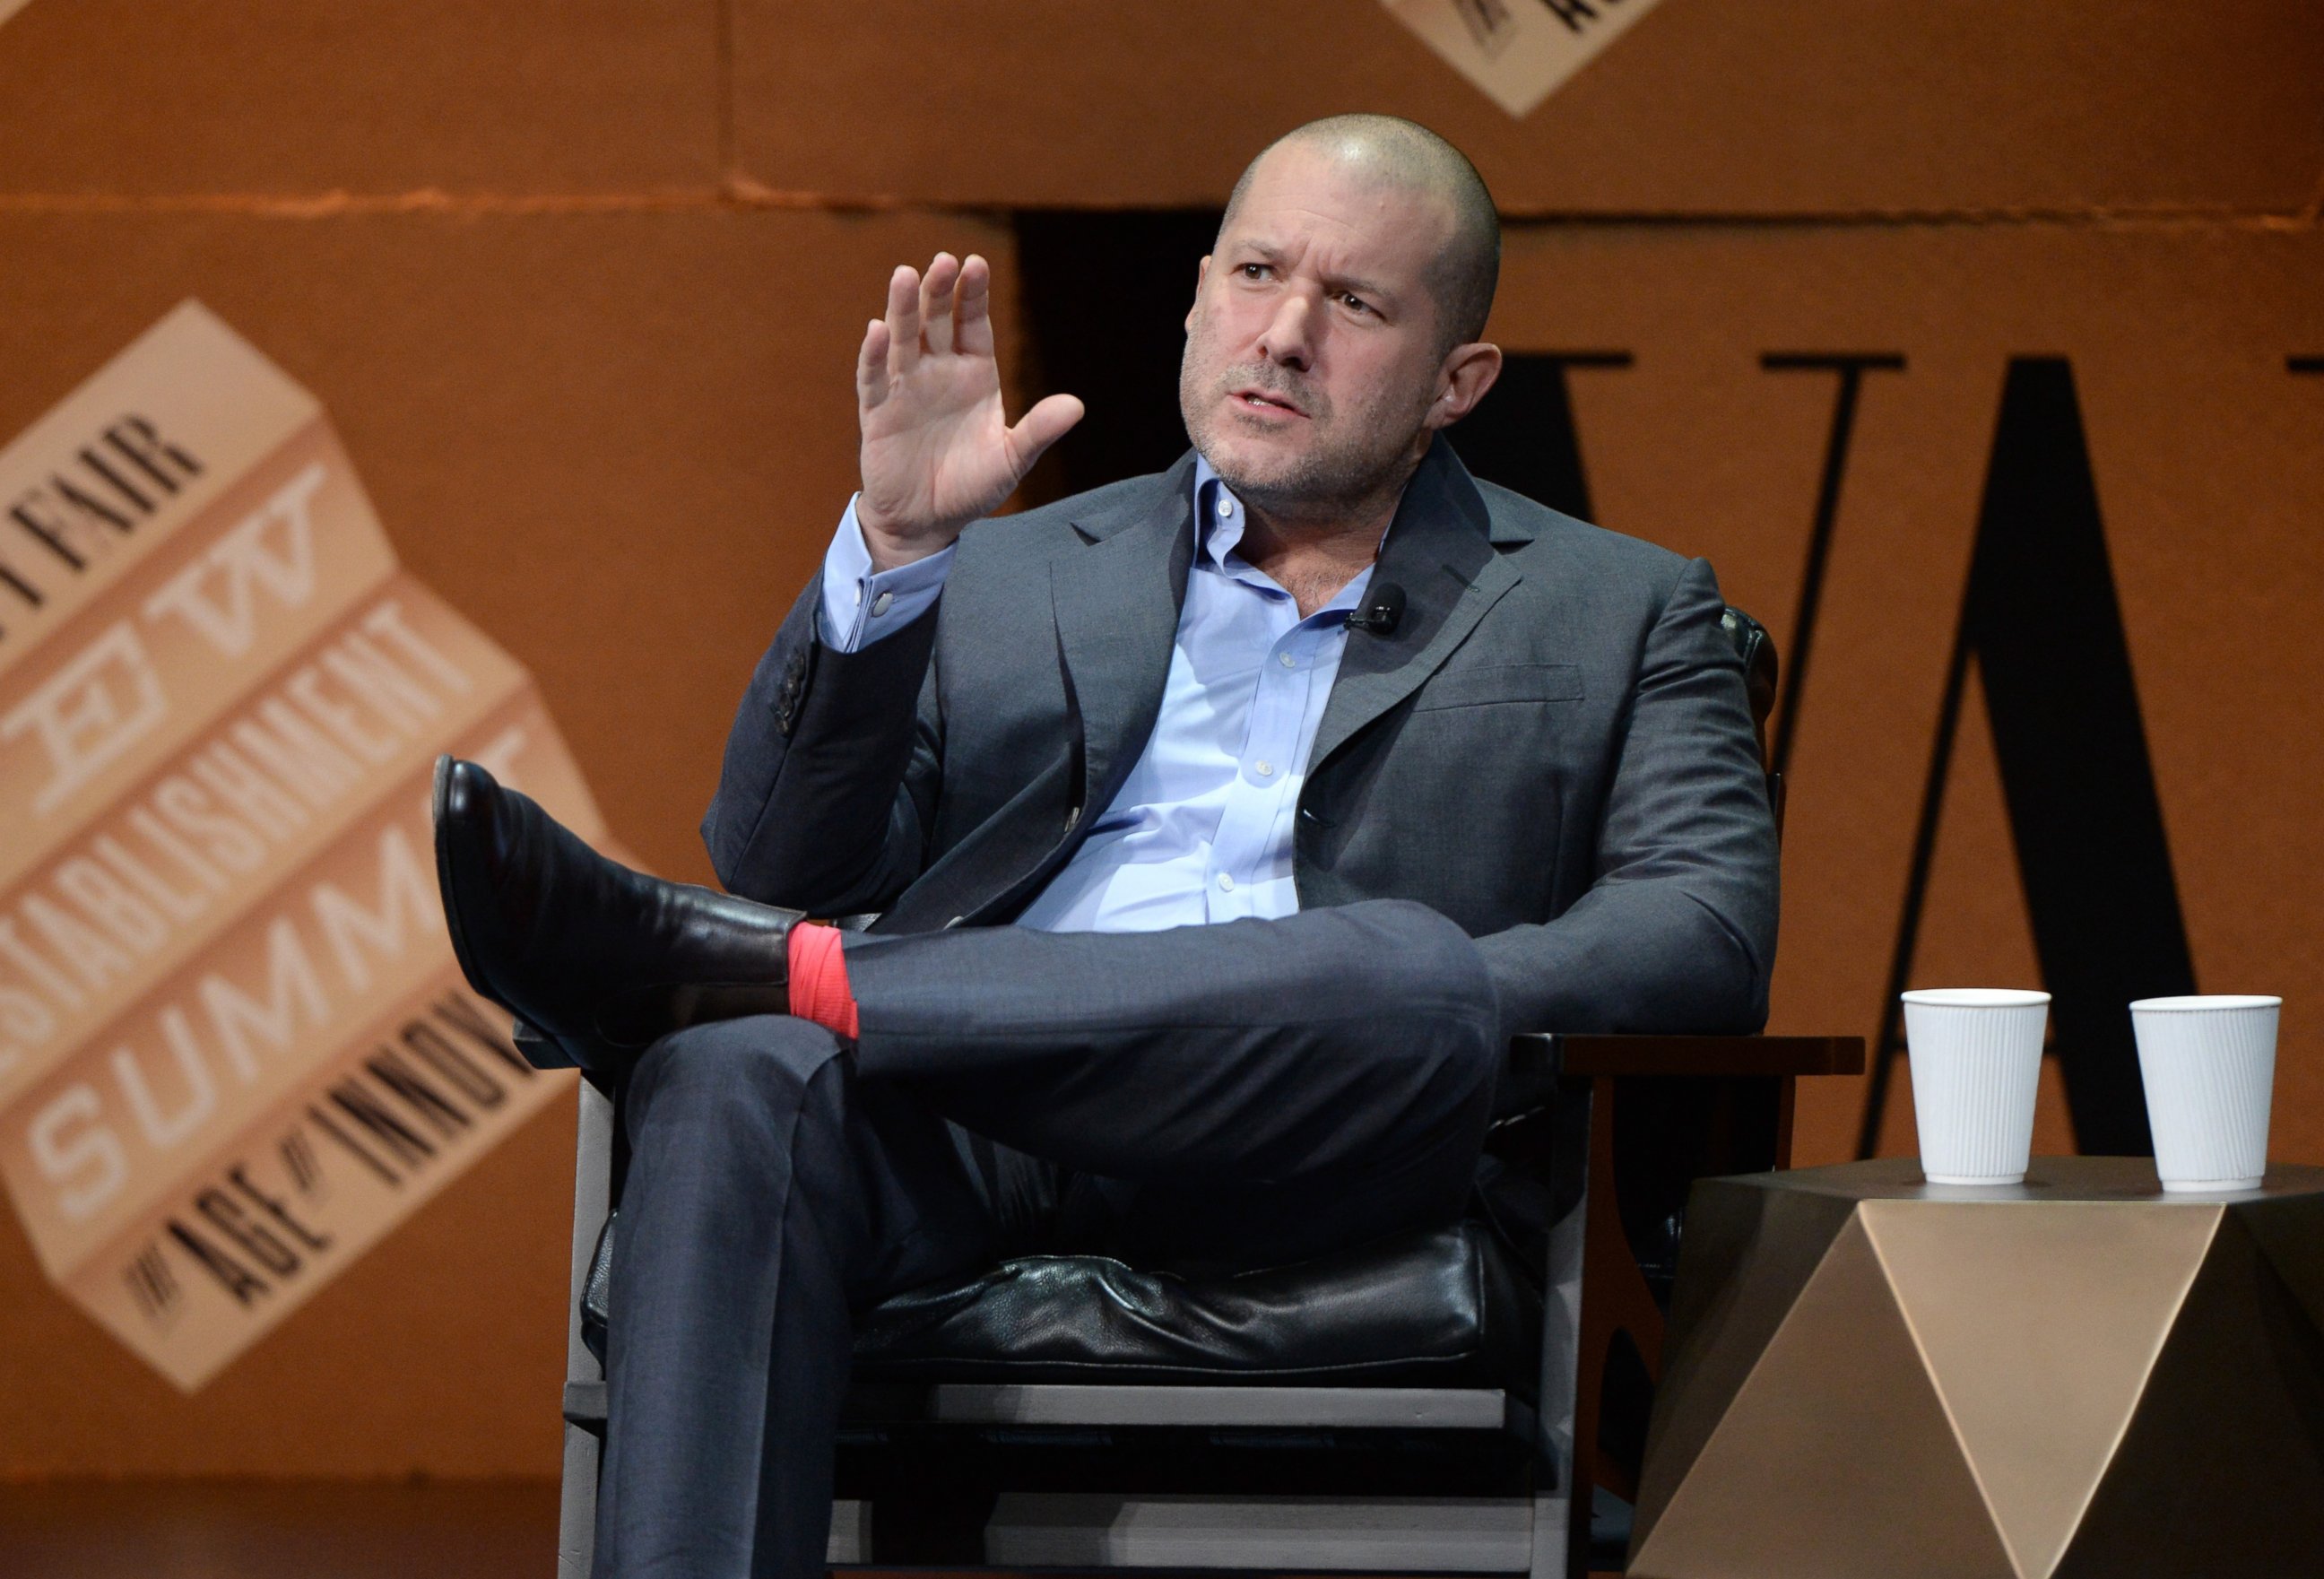 PHOTO: Apple Senior Vice President of Design Jonathan Ive speaks onstage during an event at Yerba Buena Center for the Arts on Oct. 9, 2014 in San Francisco, Calif.